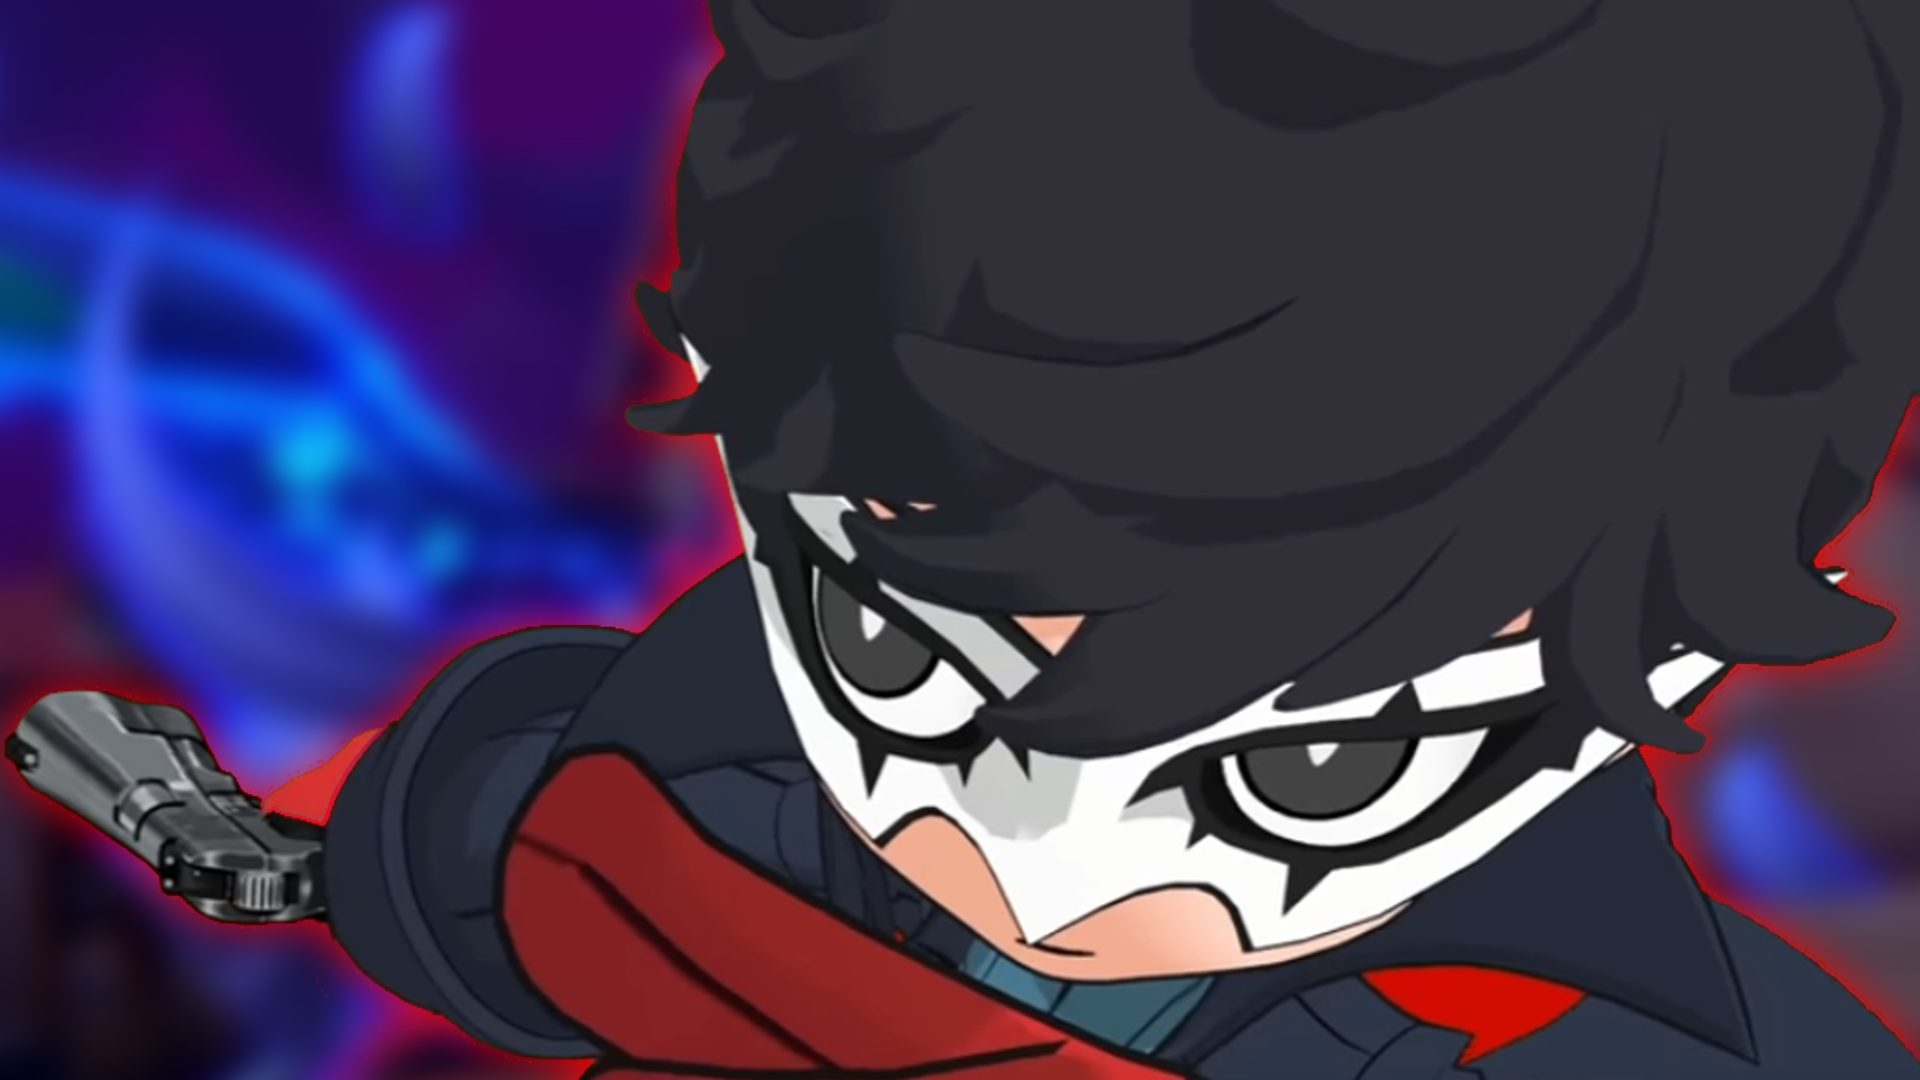 Persona 5 Tactica' Release Date, Trailer, Platforms, and Gameplay